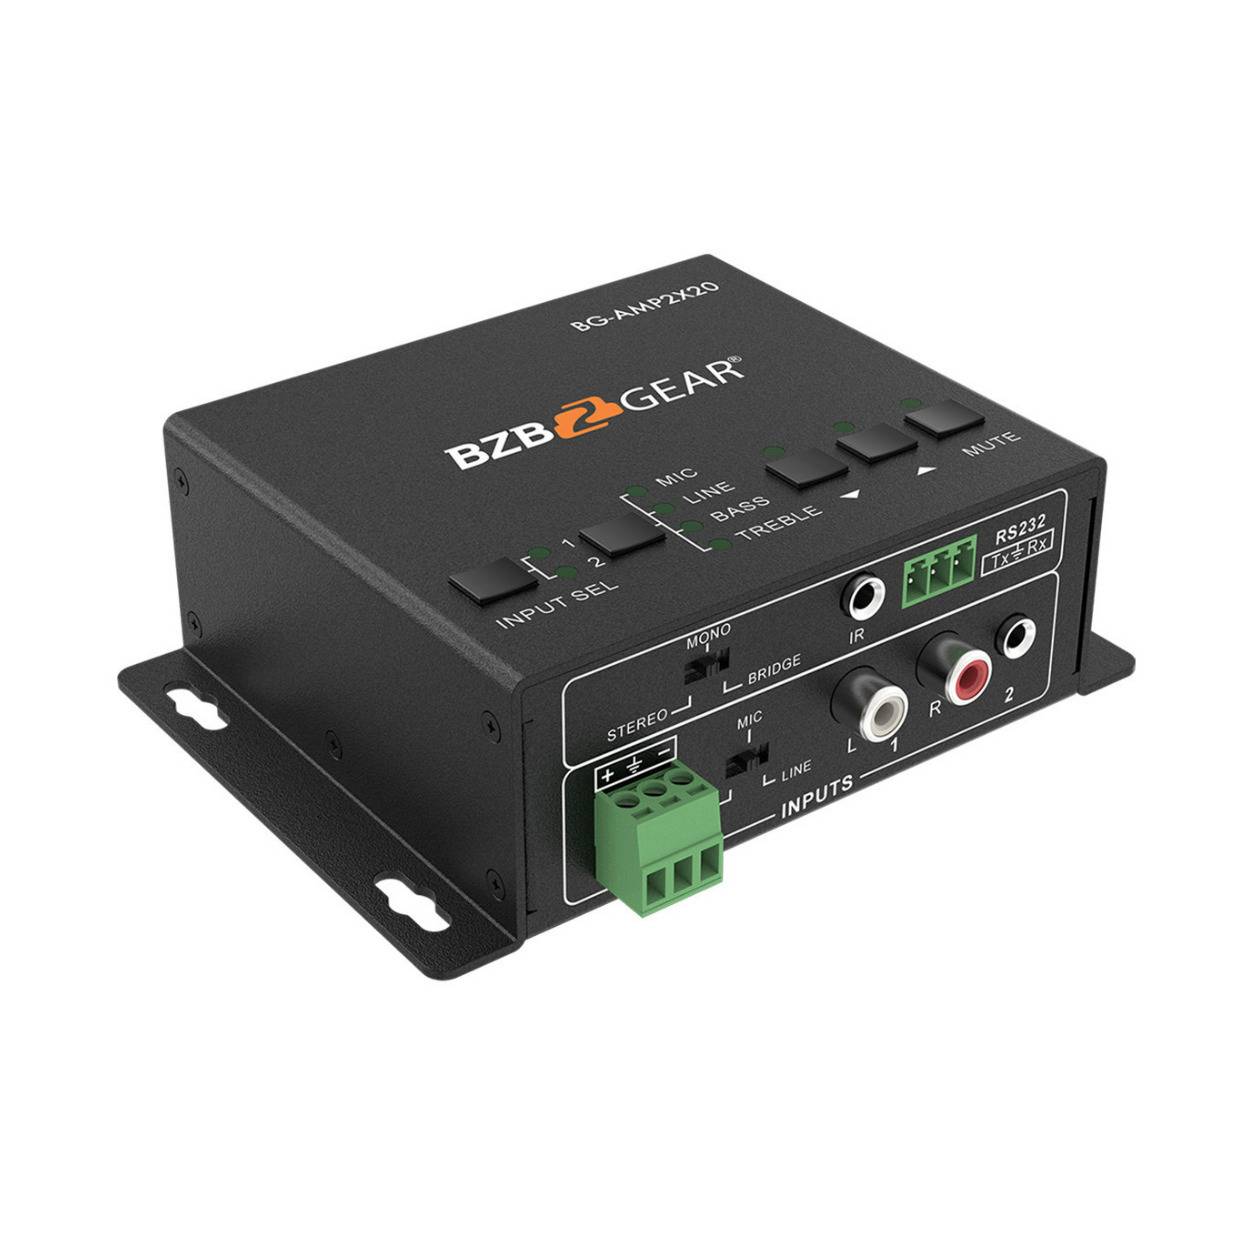 BZBGear 40W Compact Stereo/Mono 2-Channel Audio Amplifier with 3 Inputs